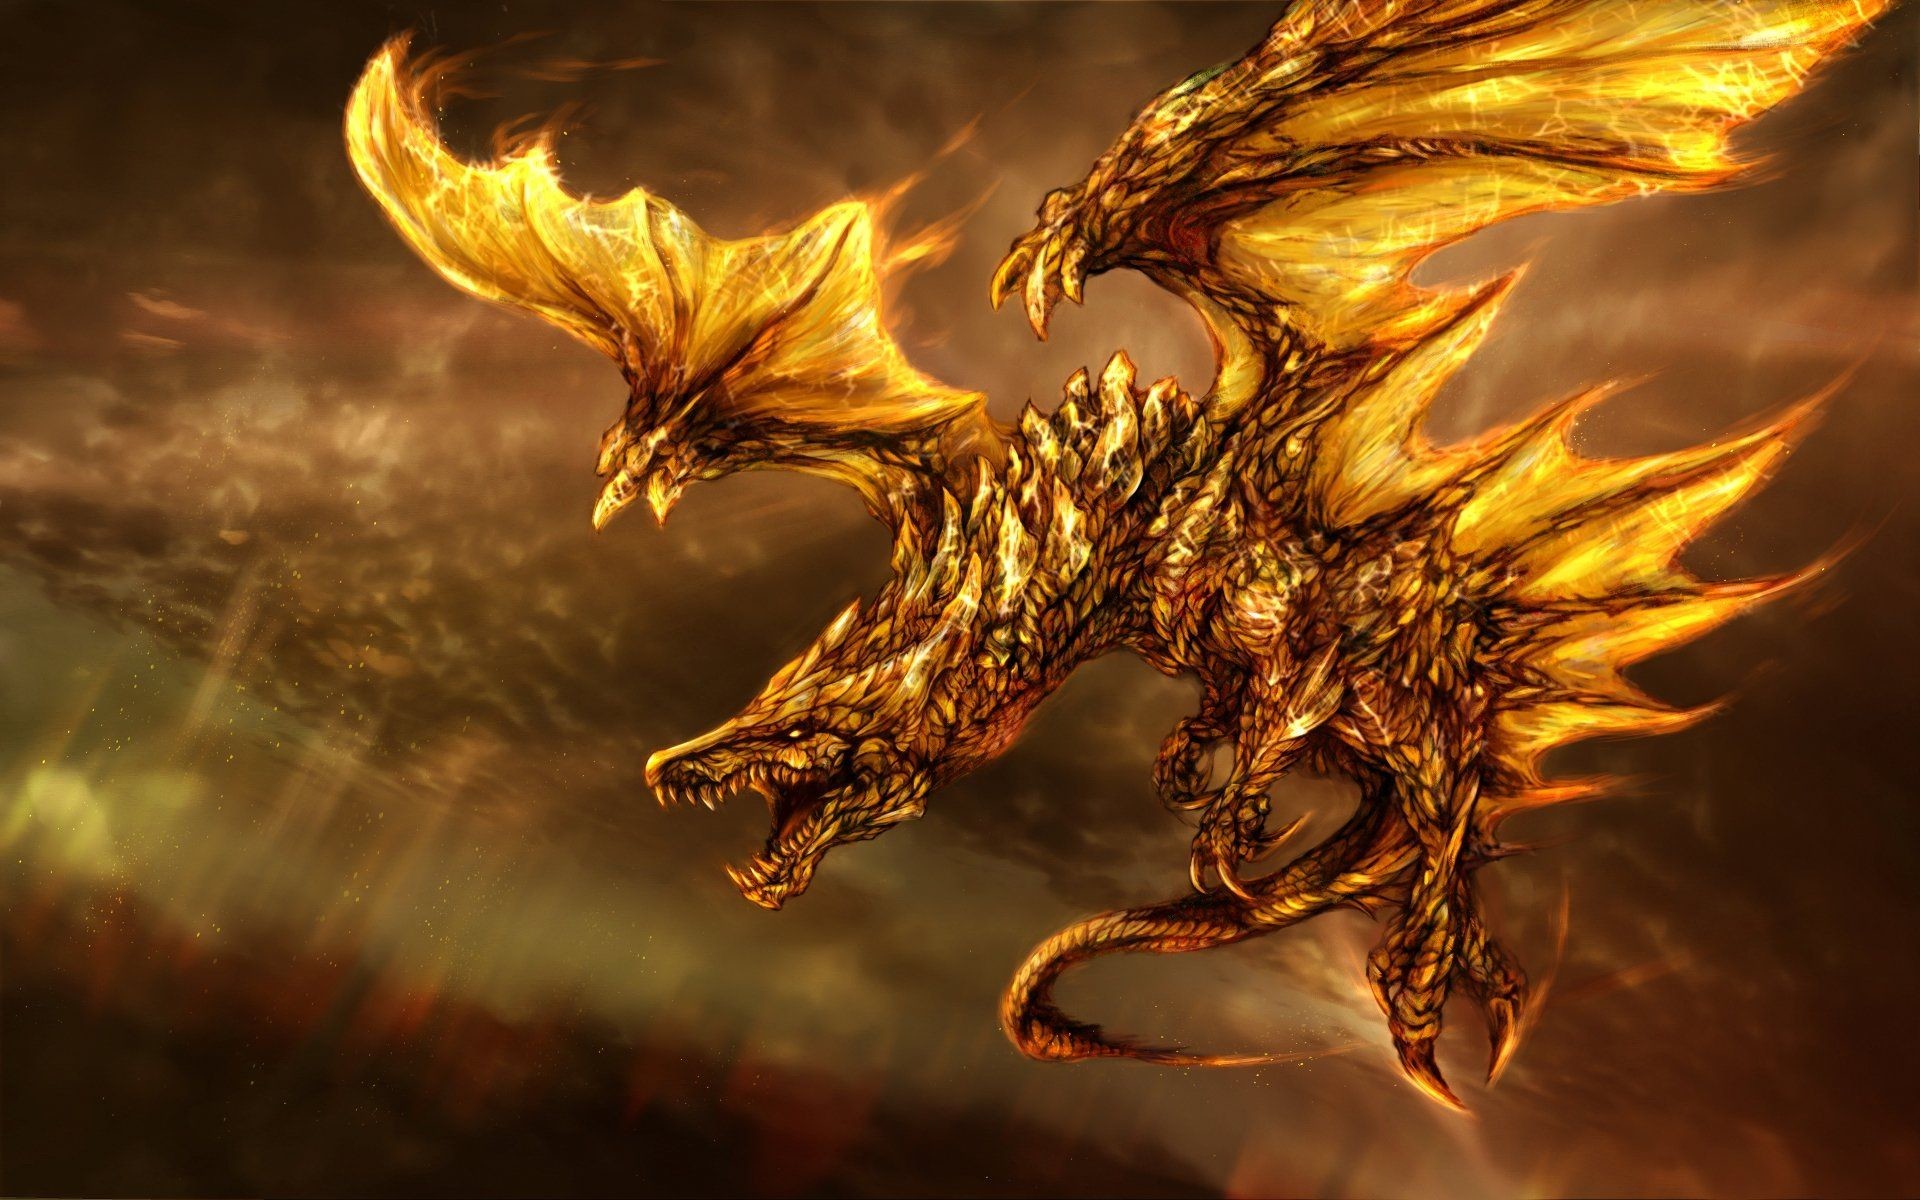 1920x1200 dragon pictures | Dragon Wallpapers HD Free Download | Wallcapture.com